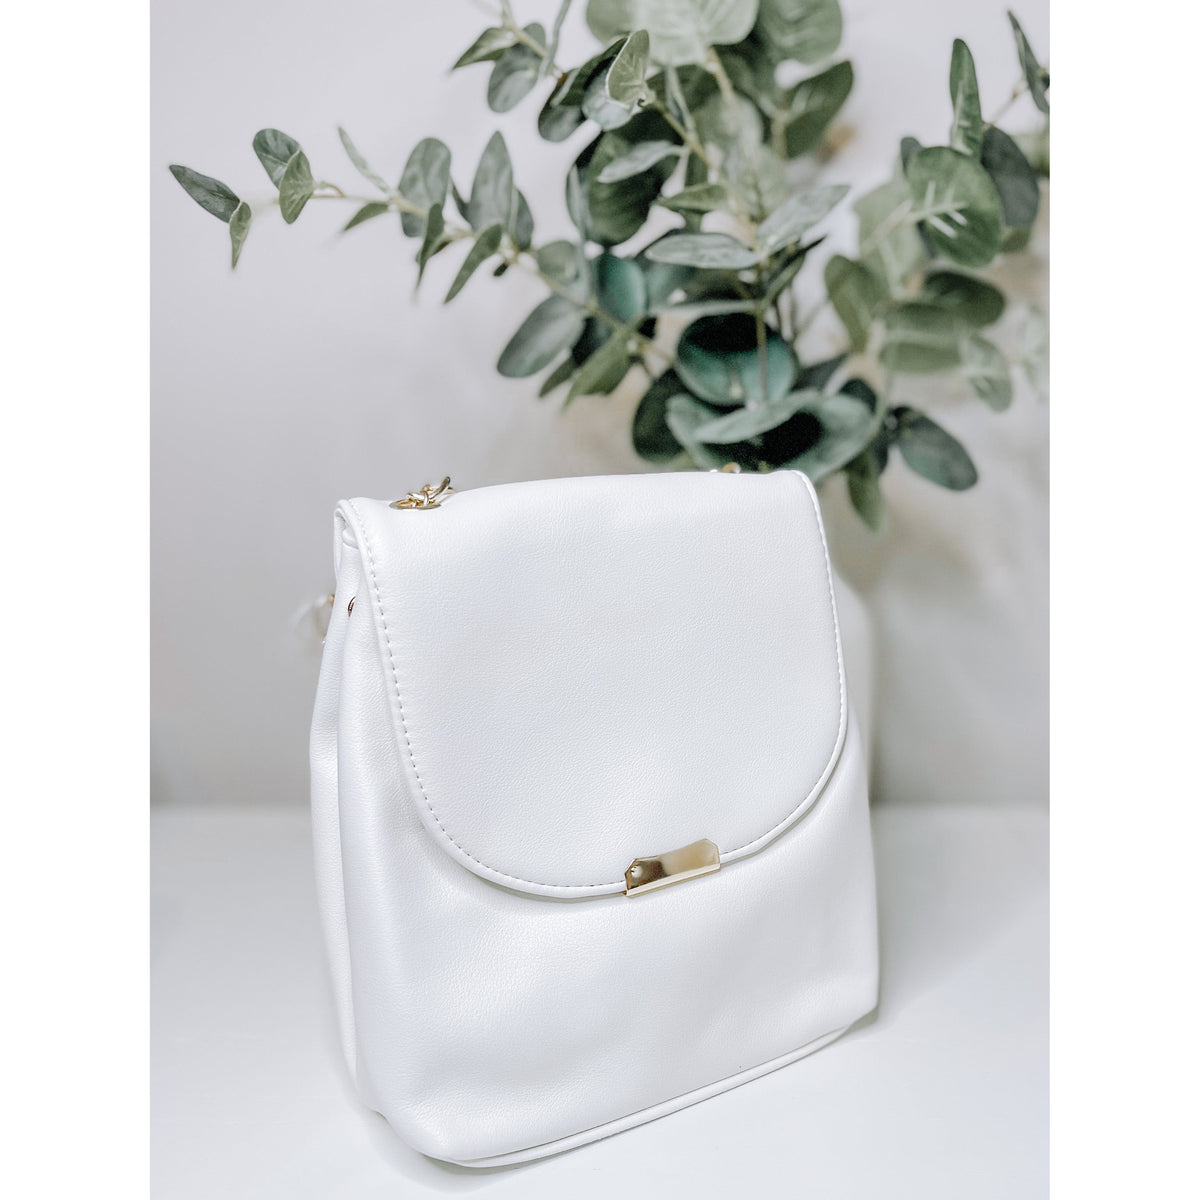 Pria Bag (Cream) - The Hive by Chris Jesselle